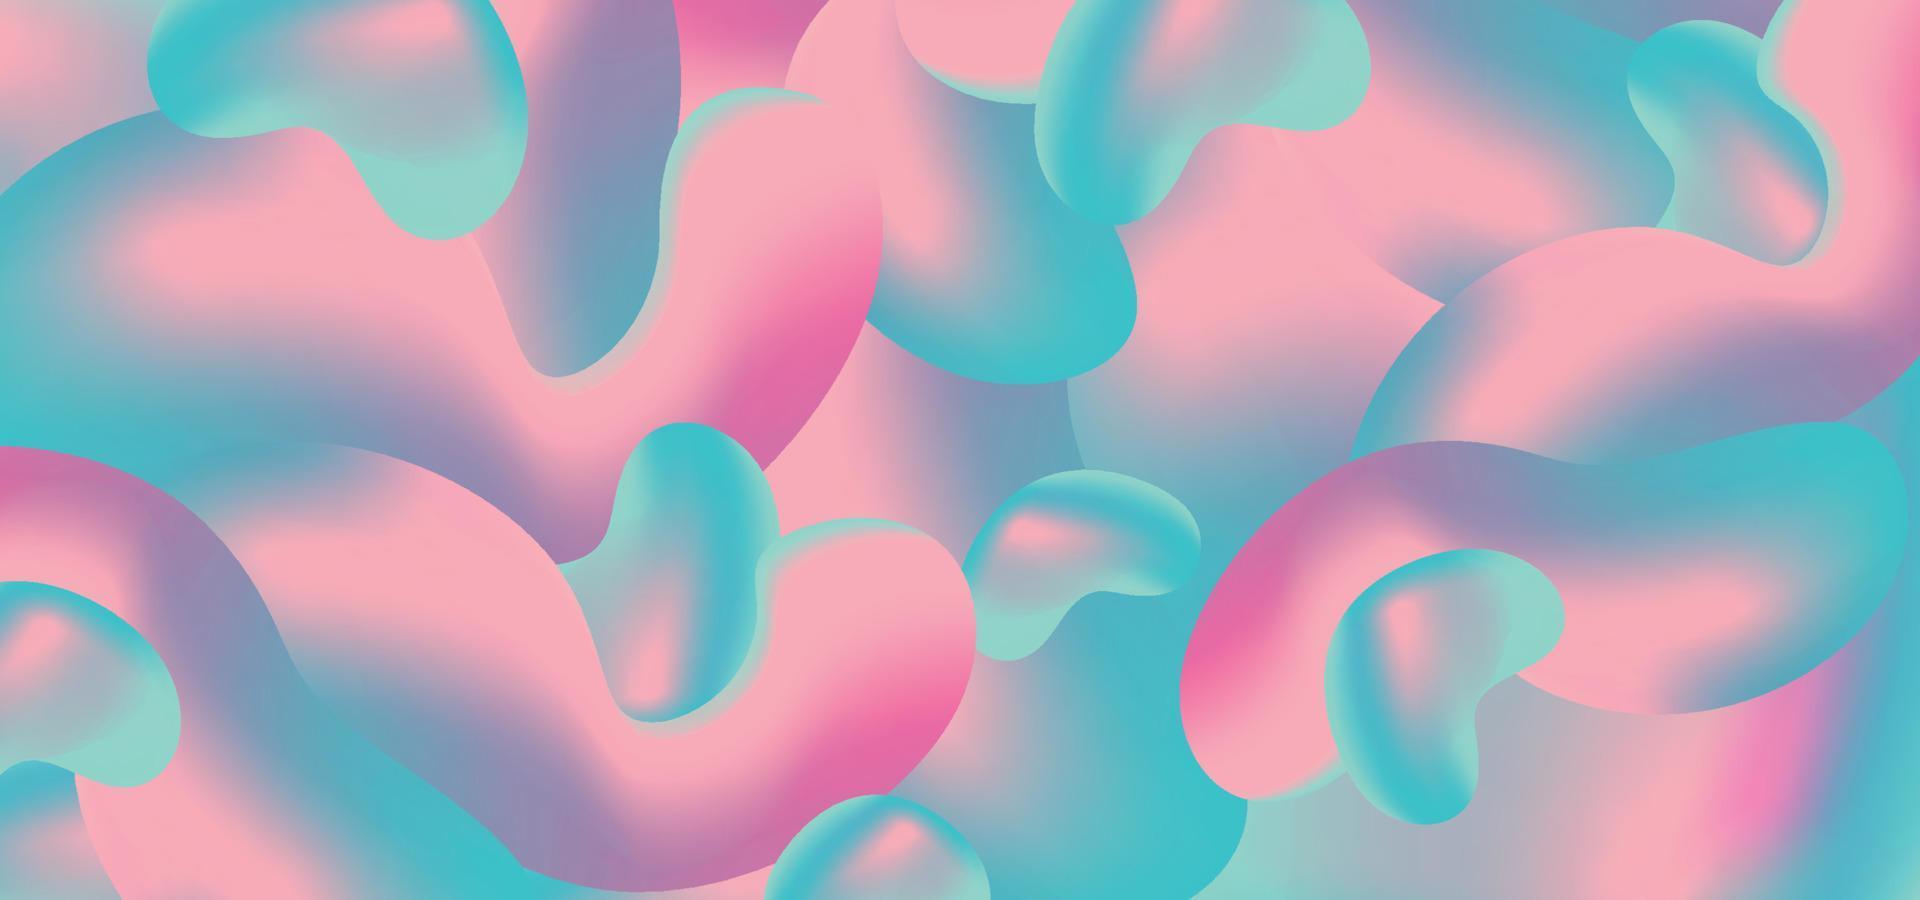 Abstract holographic liquid background with gradient colors. Vector illustration eps 10.